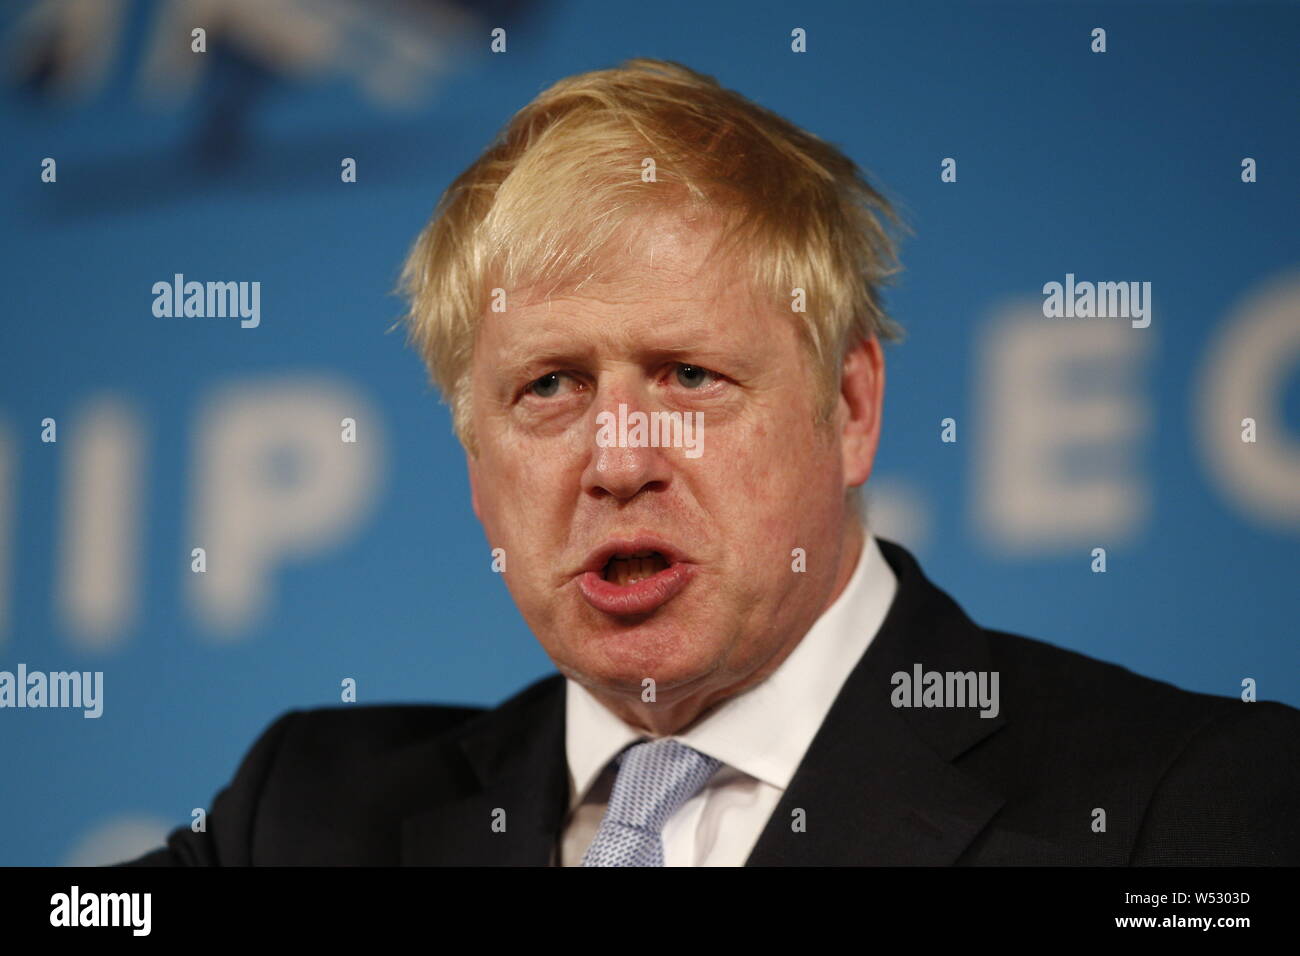 Boris speaks to the crowd of party members. Contenders in the Conservative Party leadership competition, Jeremy Hunt and Boris Johnson at Hustings in Bournemouth, Dorset. on June 27, 2019 Stock Photo